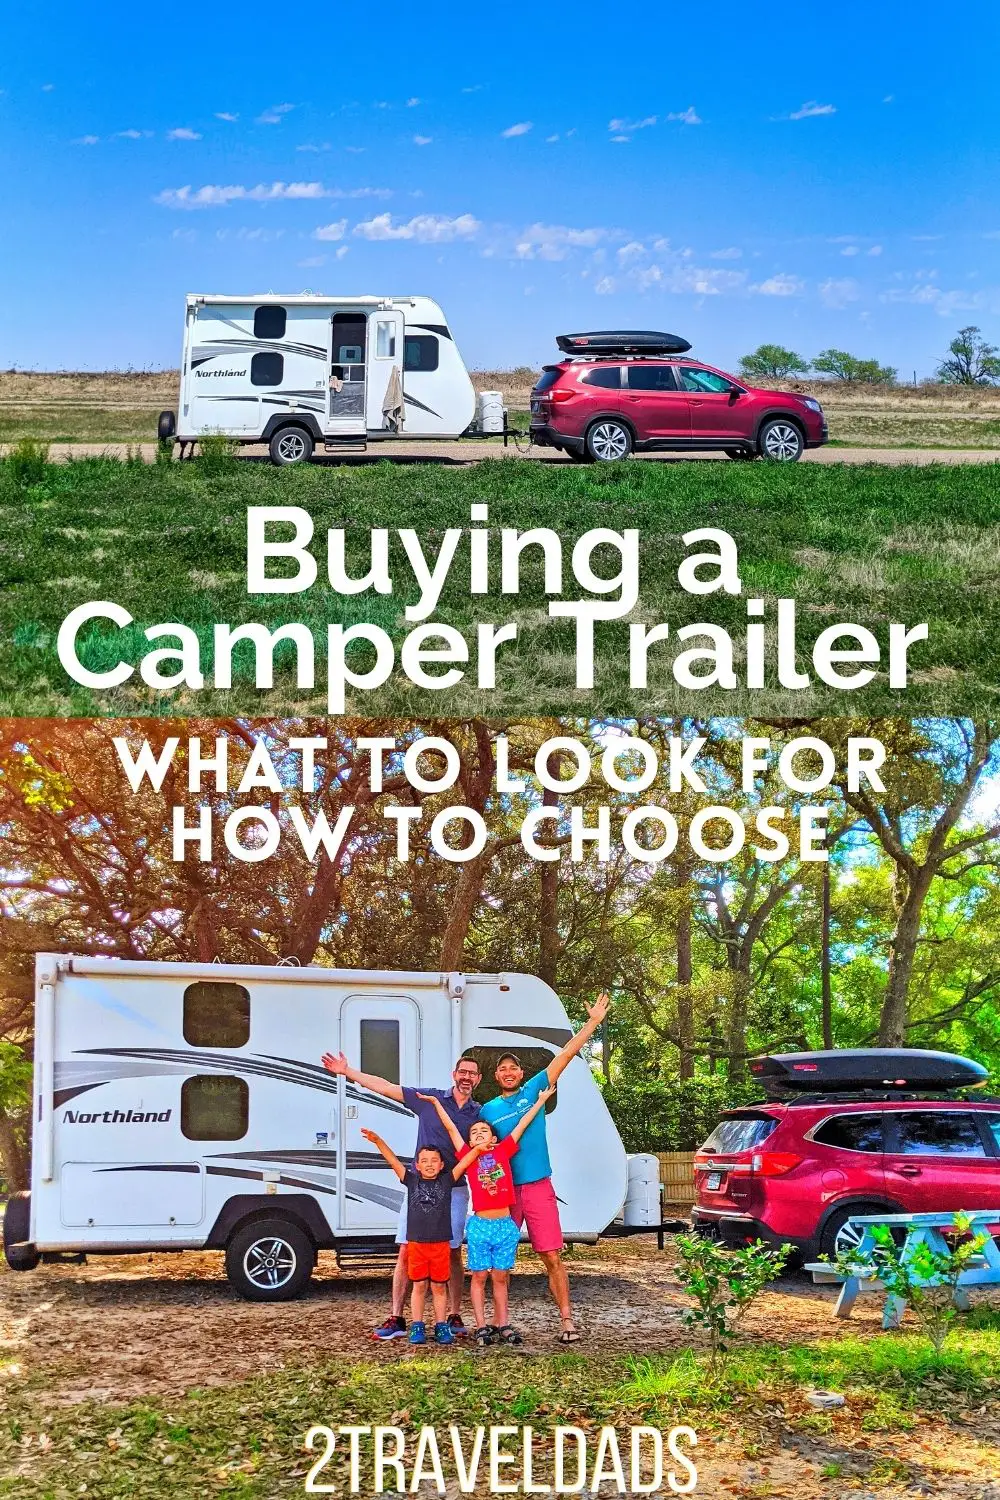 Buying a camper trailer can be complicated. We did a pandemic road trip across the USA in our camping trailer and learned a lot. These are our experiences and observations as new RV owners and in driving across the country during COVID19.